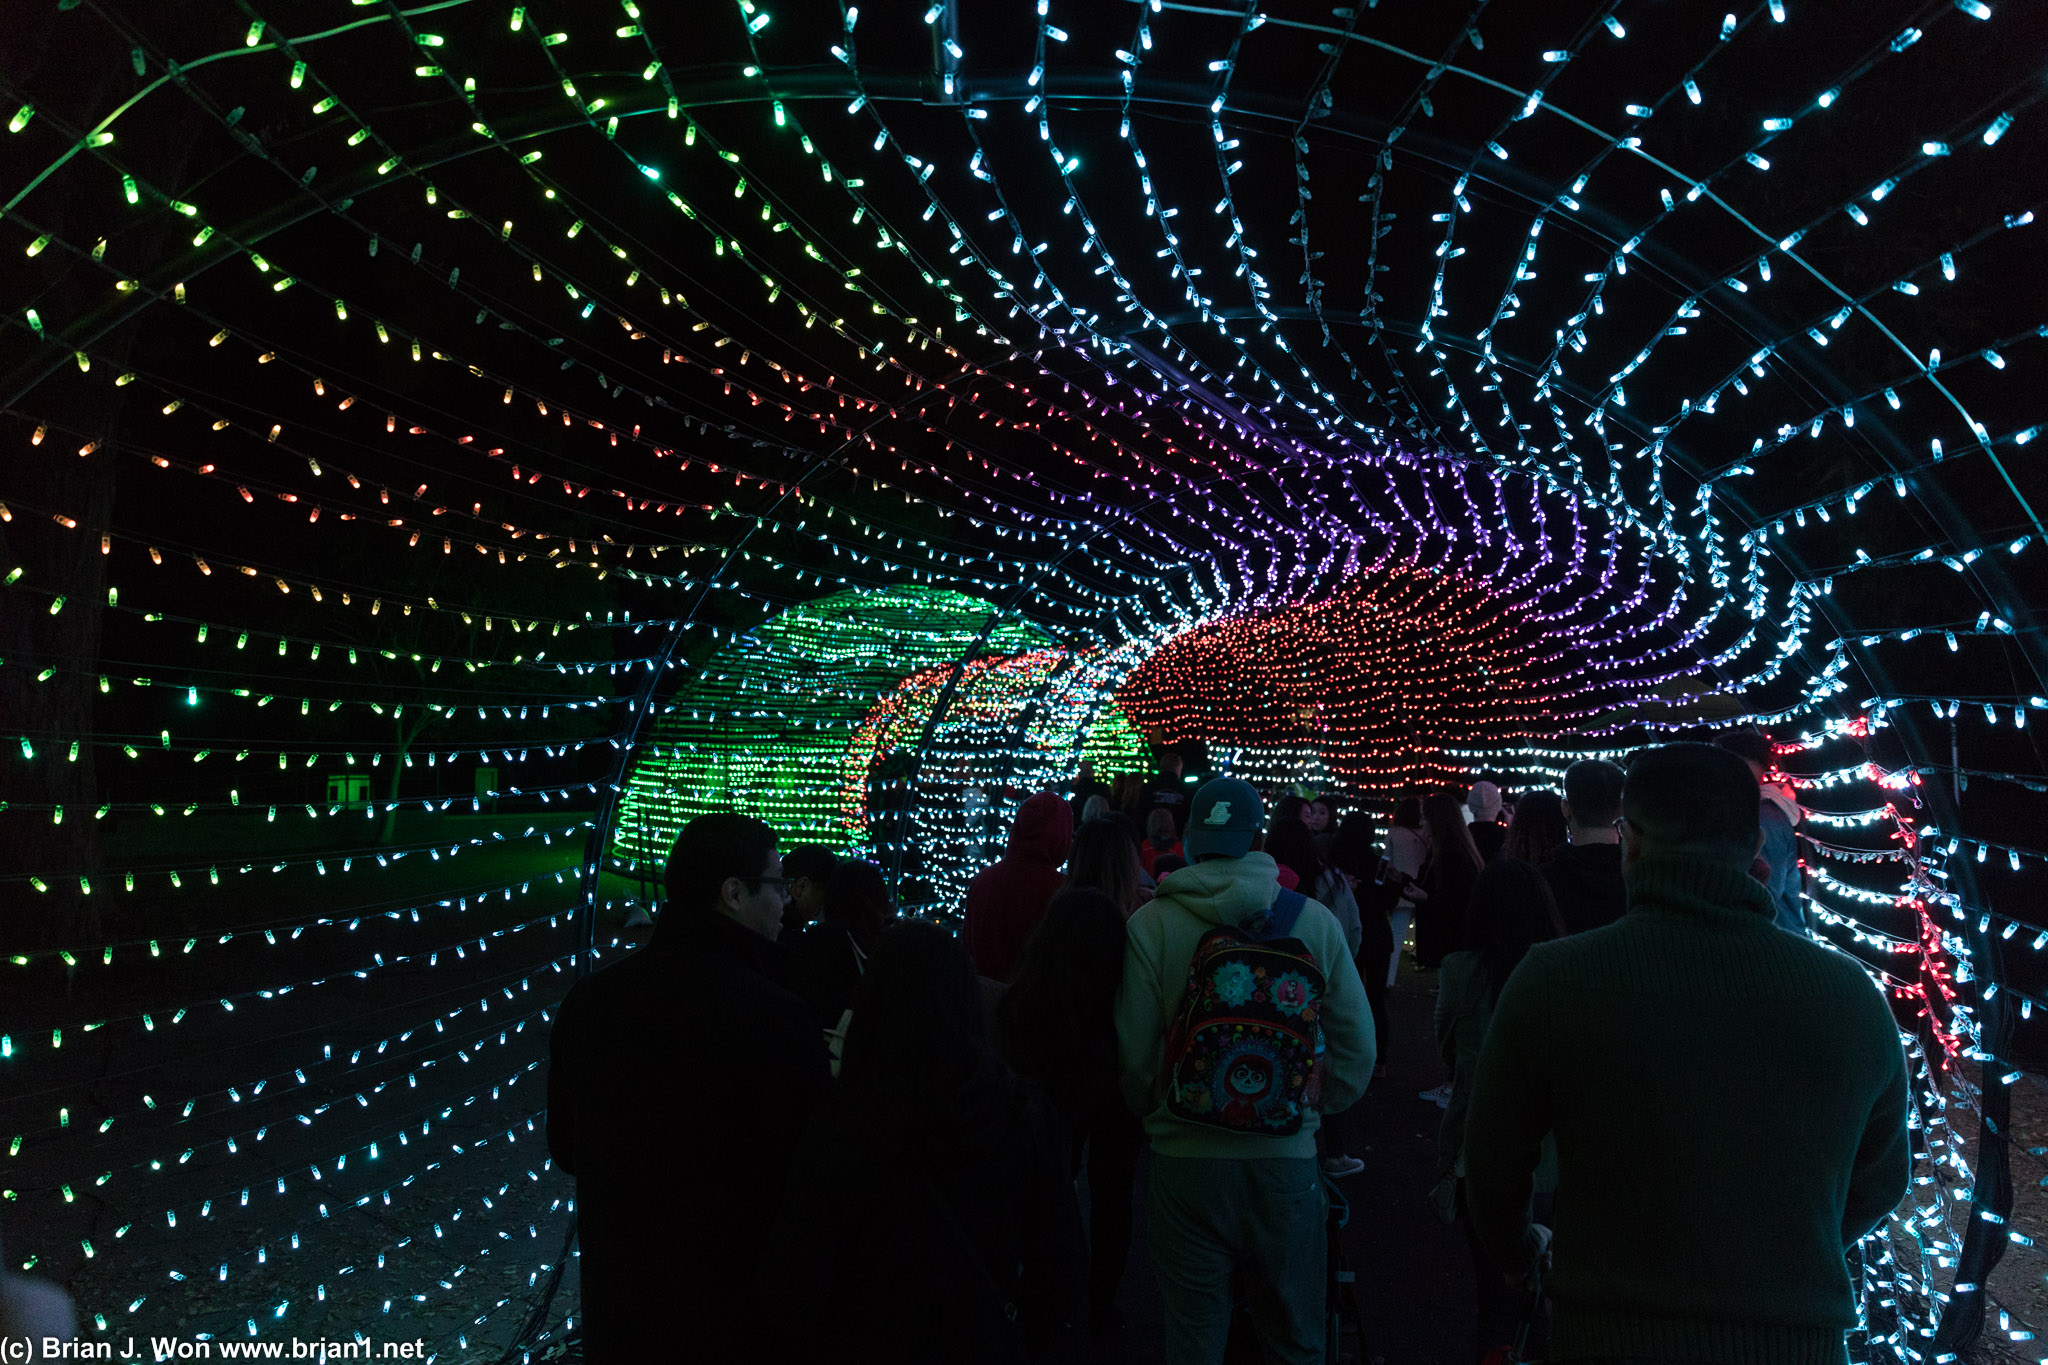 The infamous tunnel of lights.